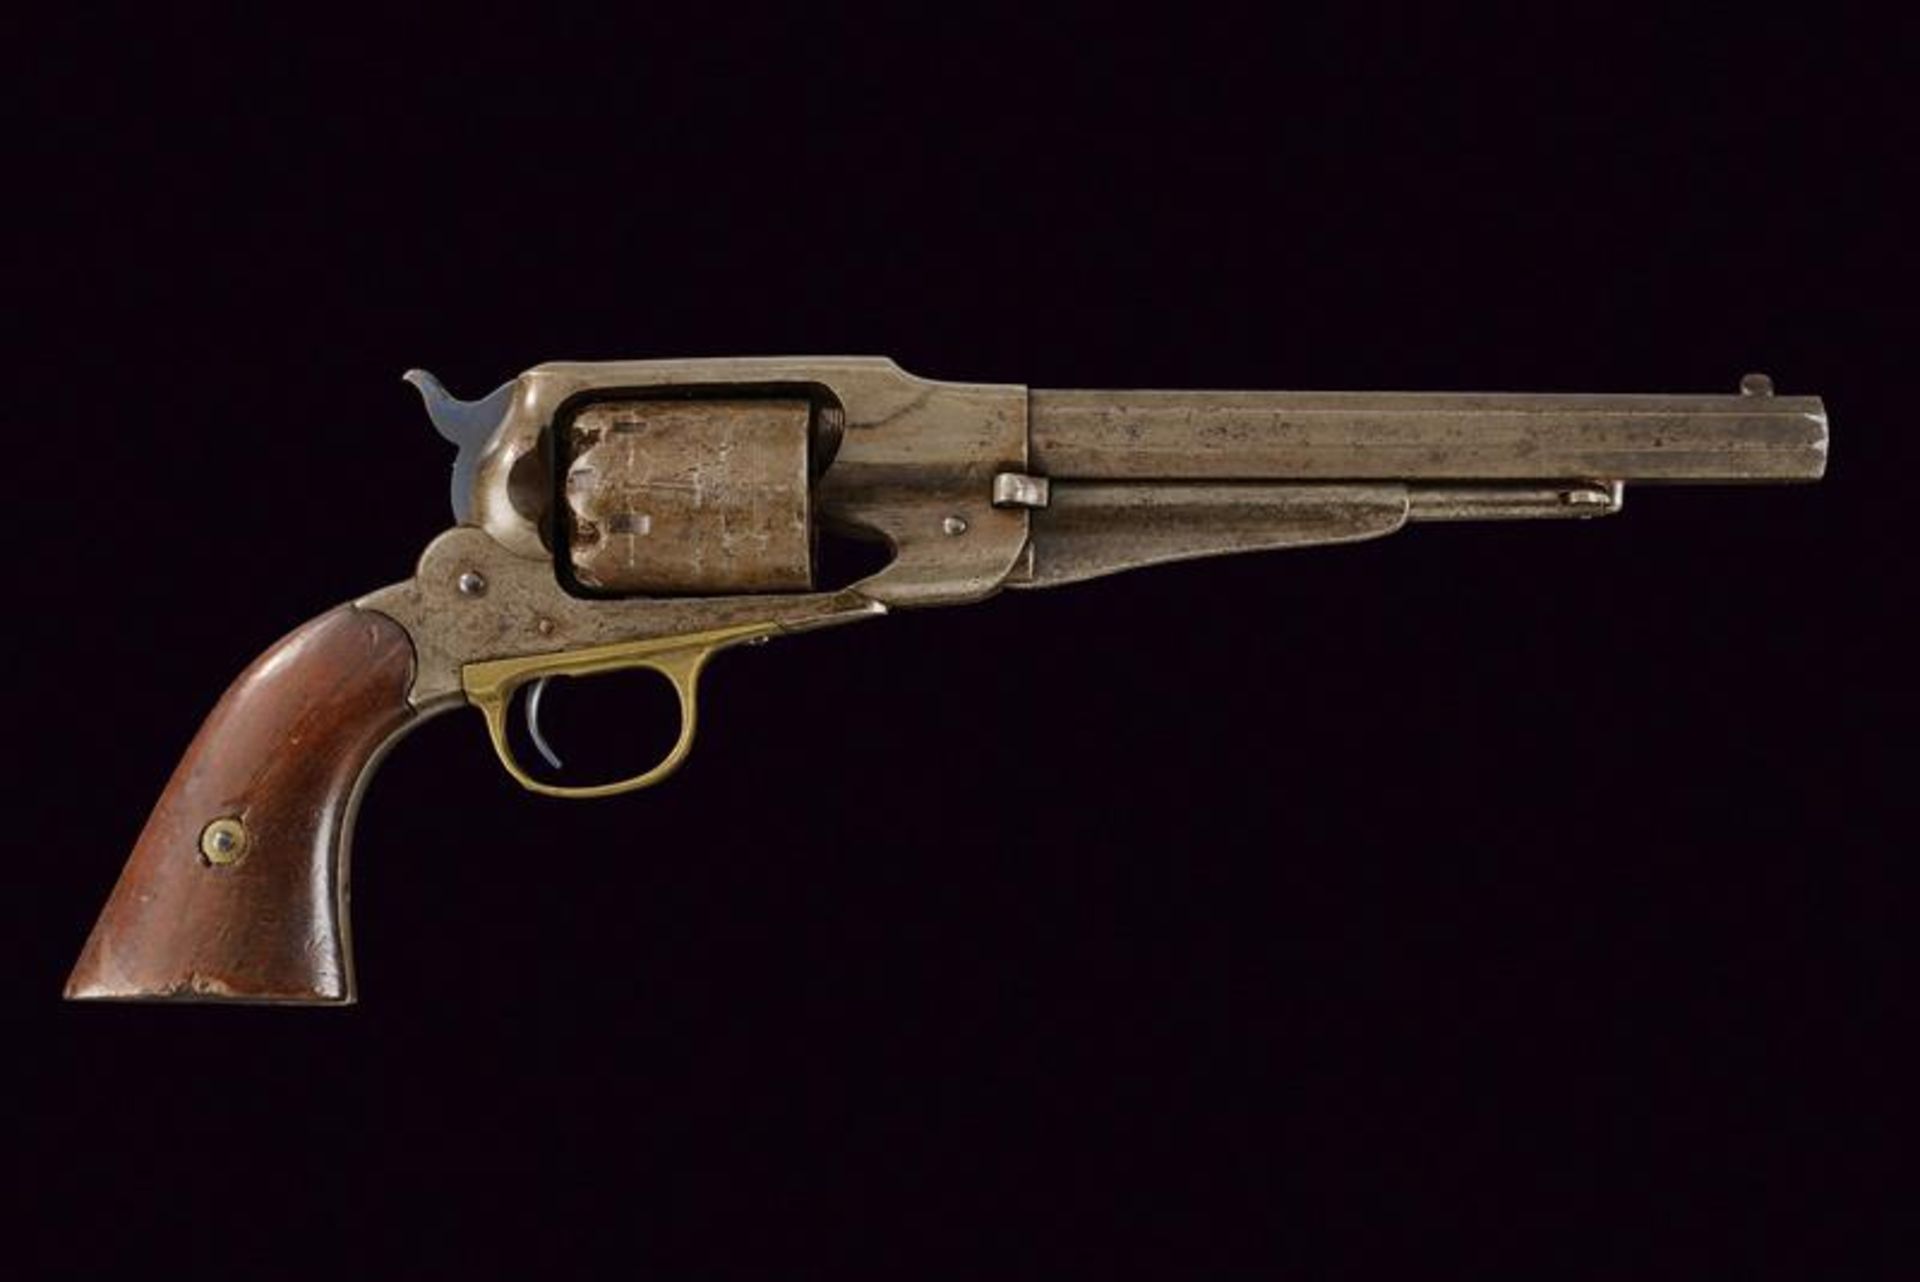 A Remington New Model Army Revolver - Image 5 of 5